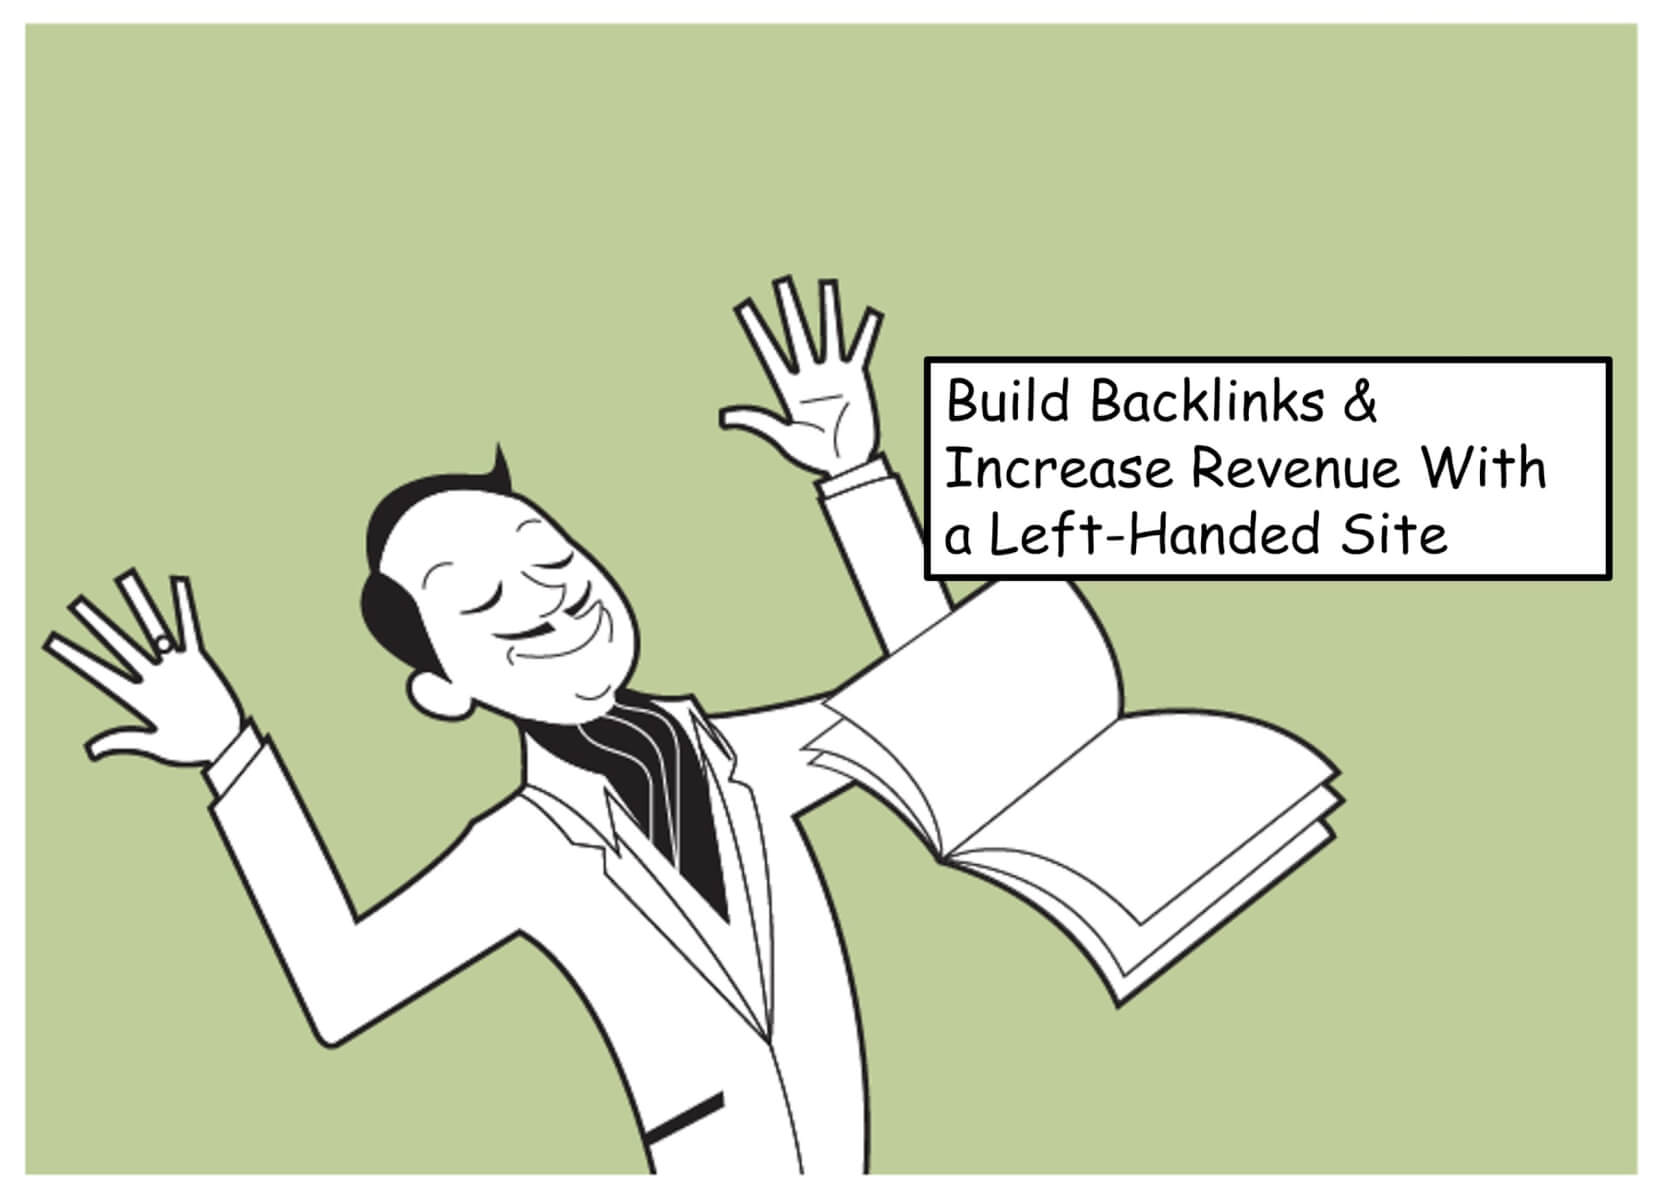 Build Backlinks & Increase Revenue With a Left Handed Site